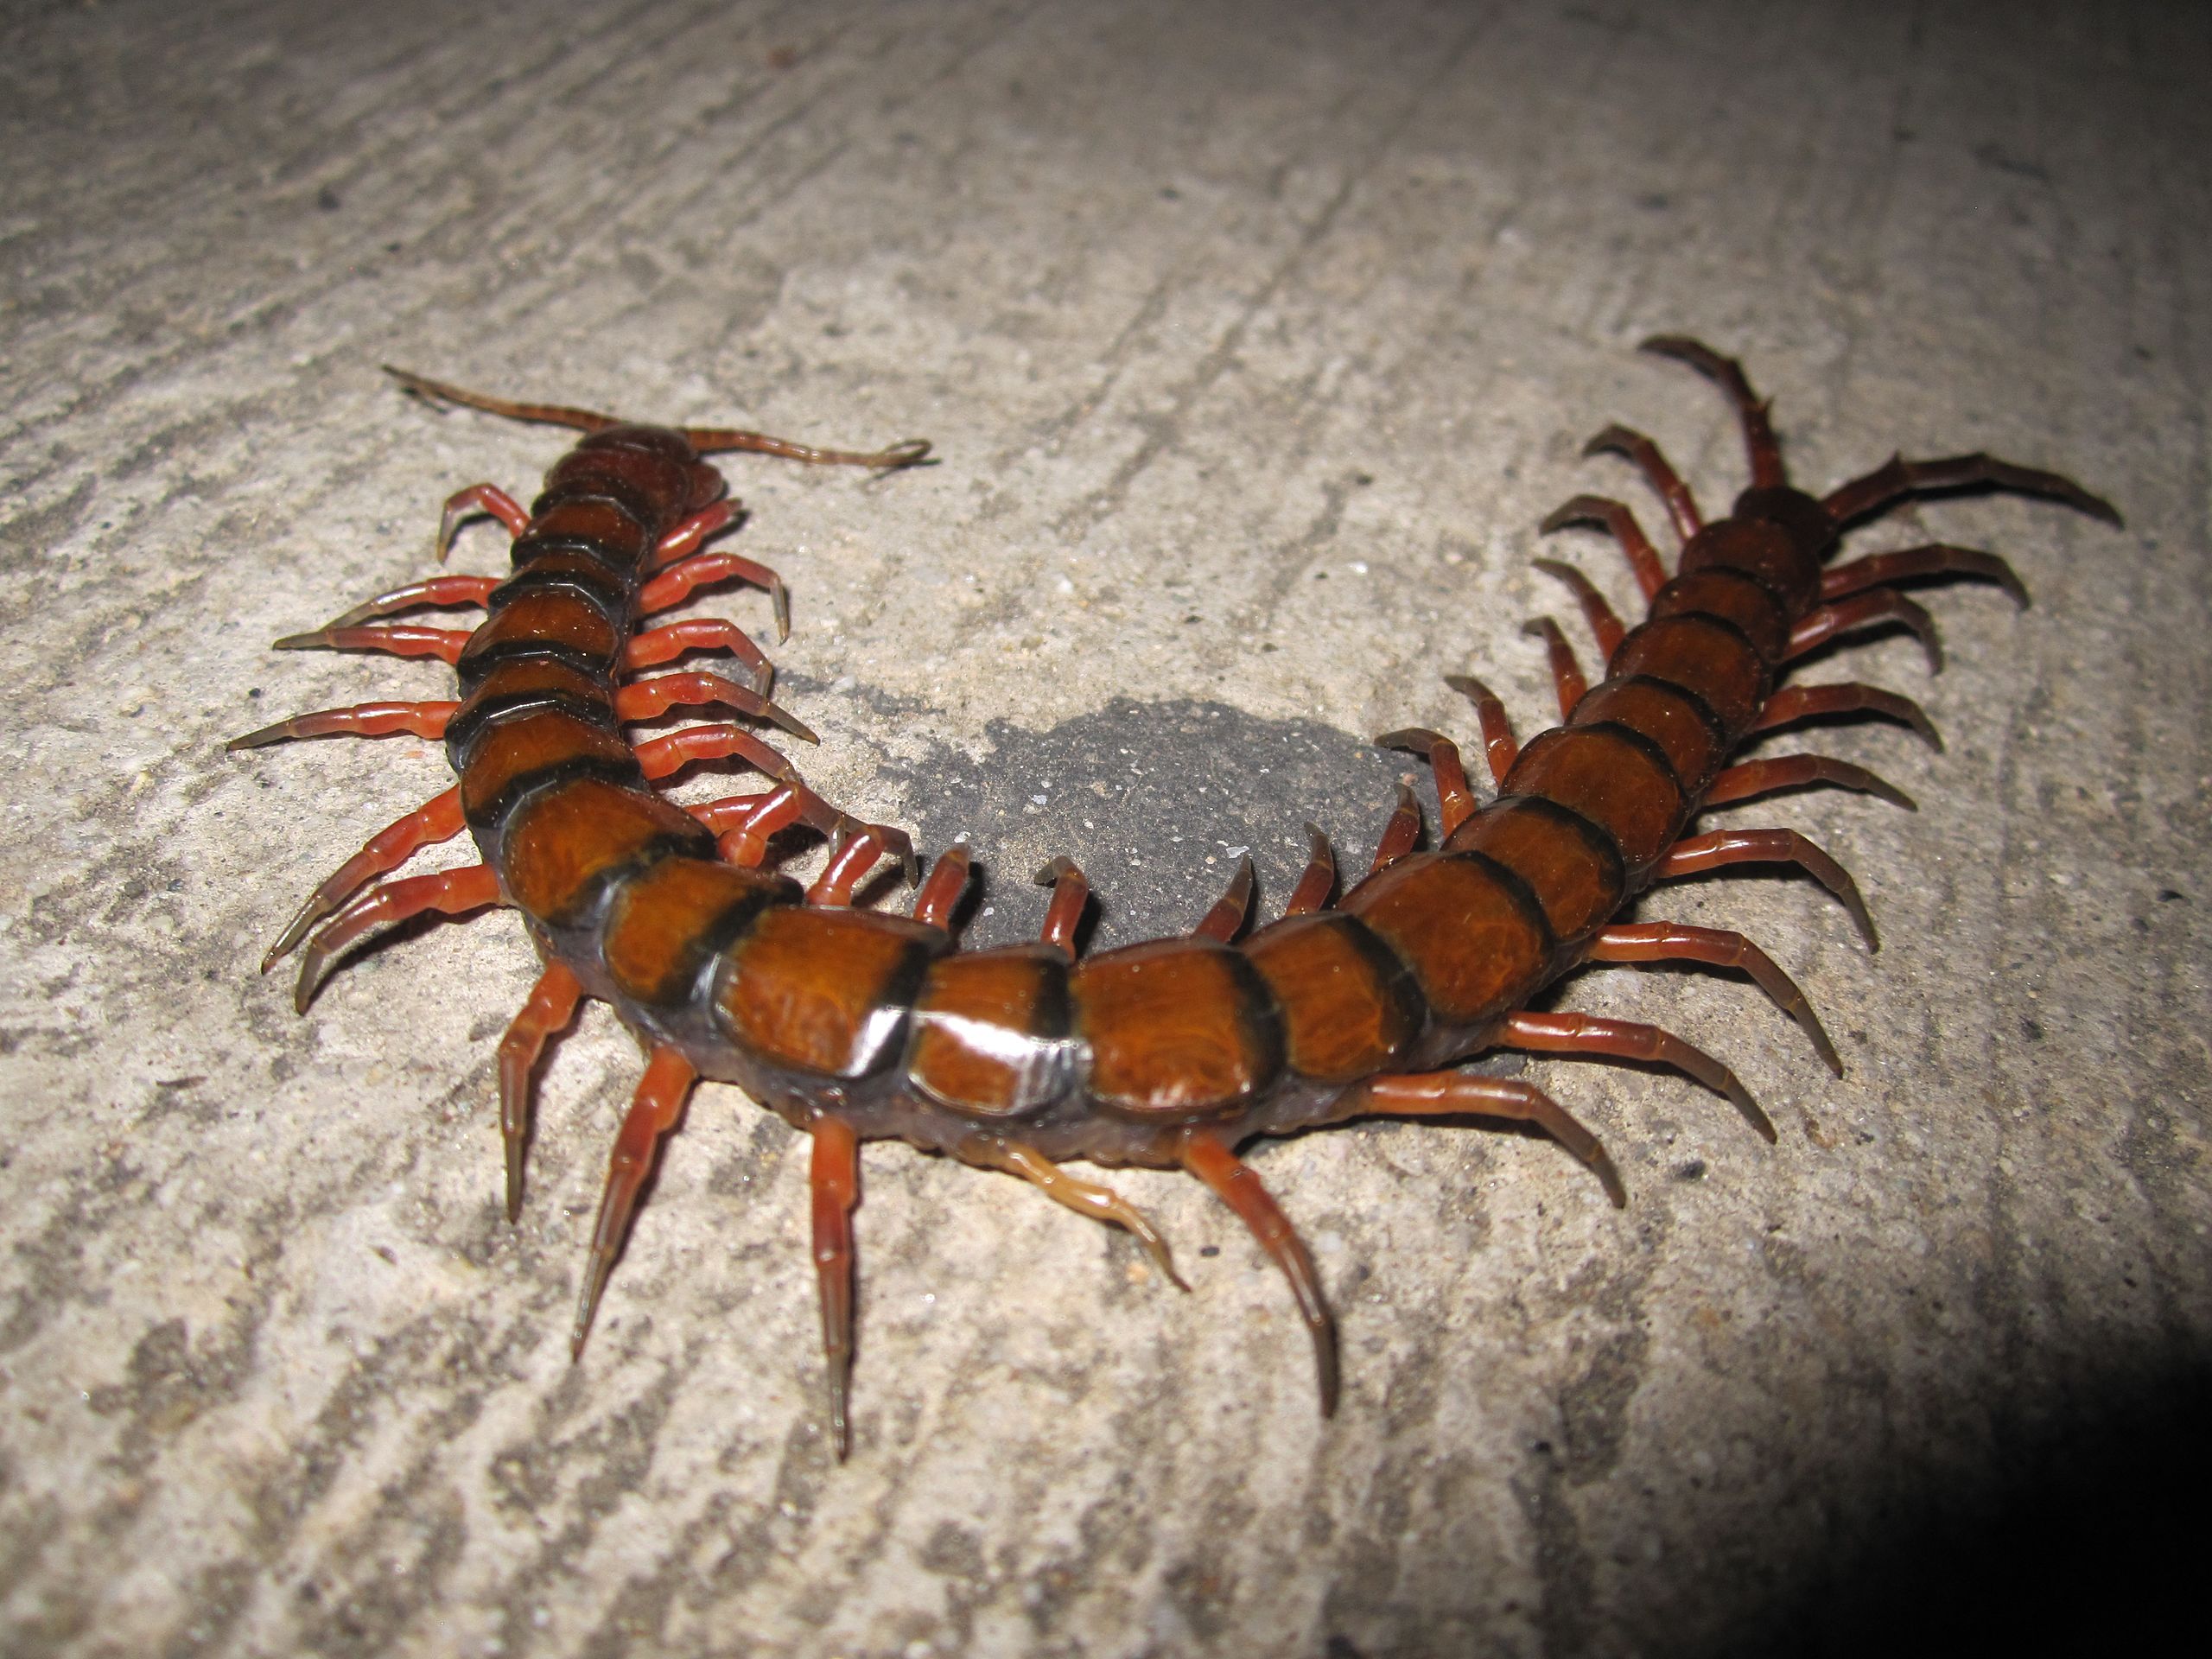 Scolopendra Gigantea - The Largest Centipede Ever Known